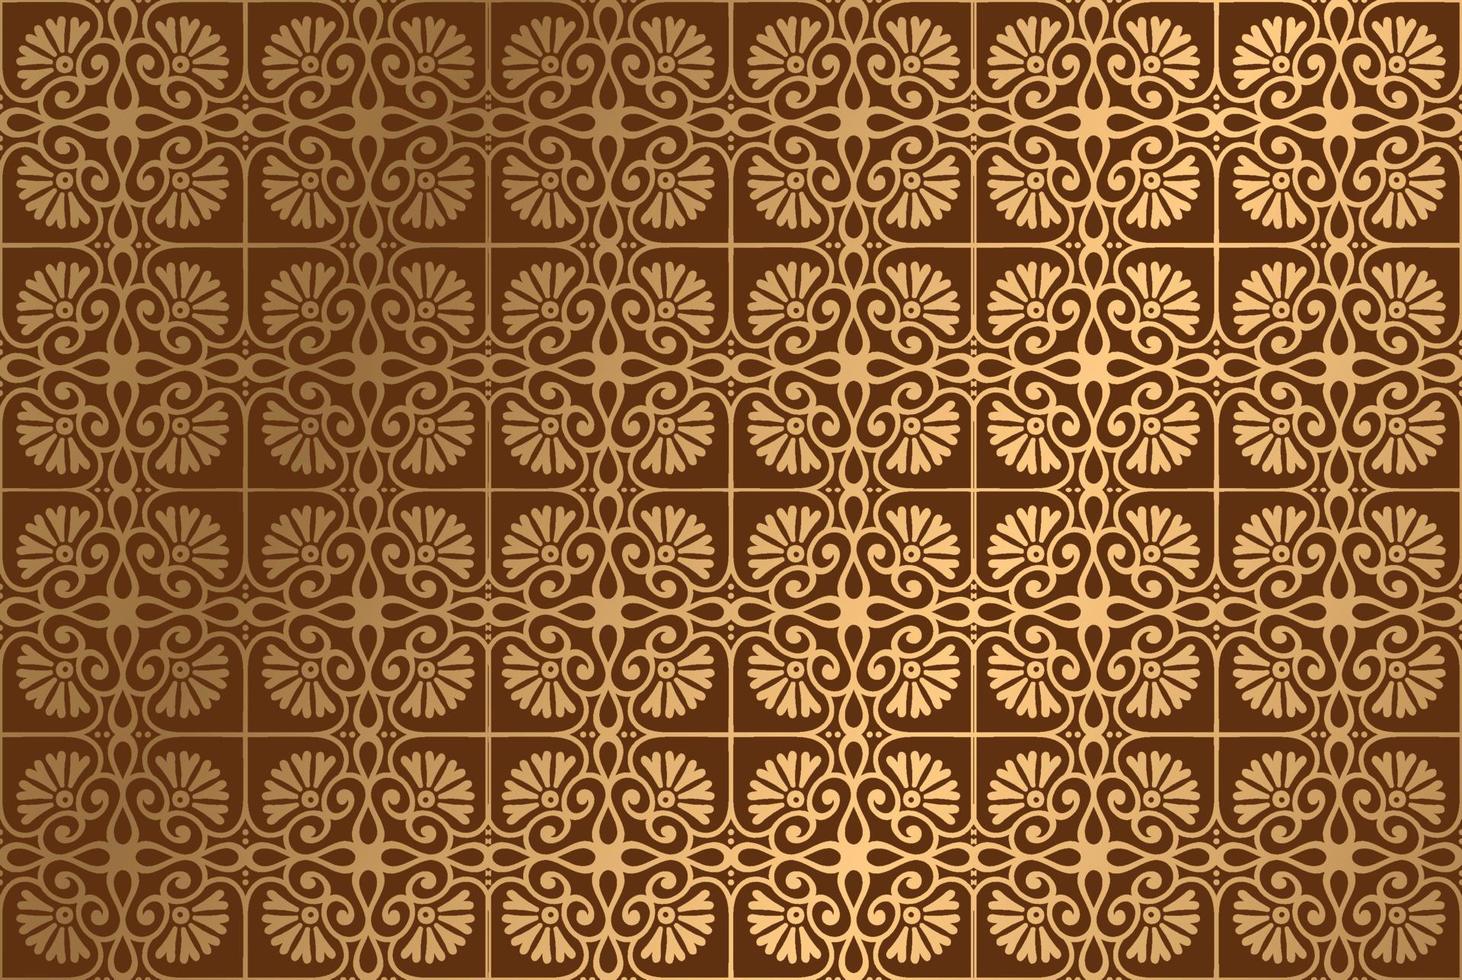 Ethnic pattern background. Vector illustration for wallpaper, wrapping, fabric, wedding, poster, banner, etc